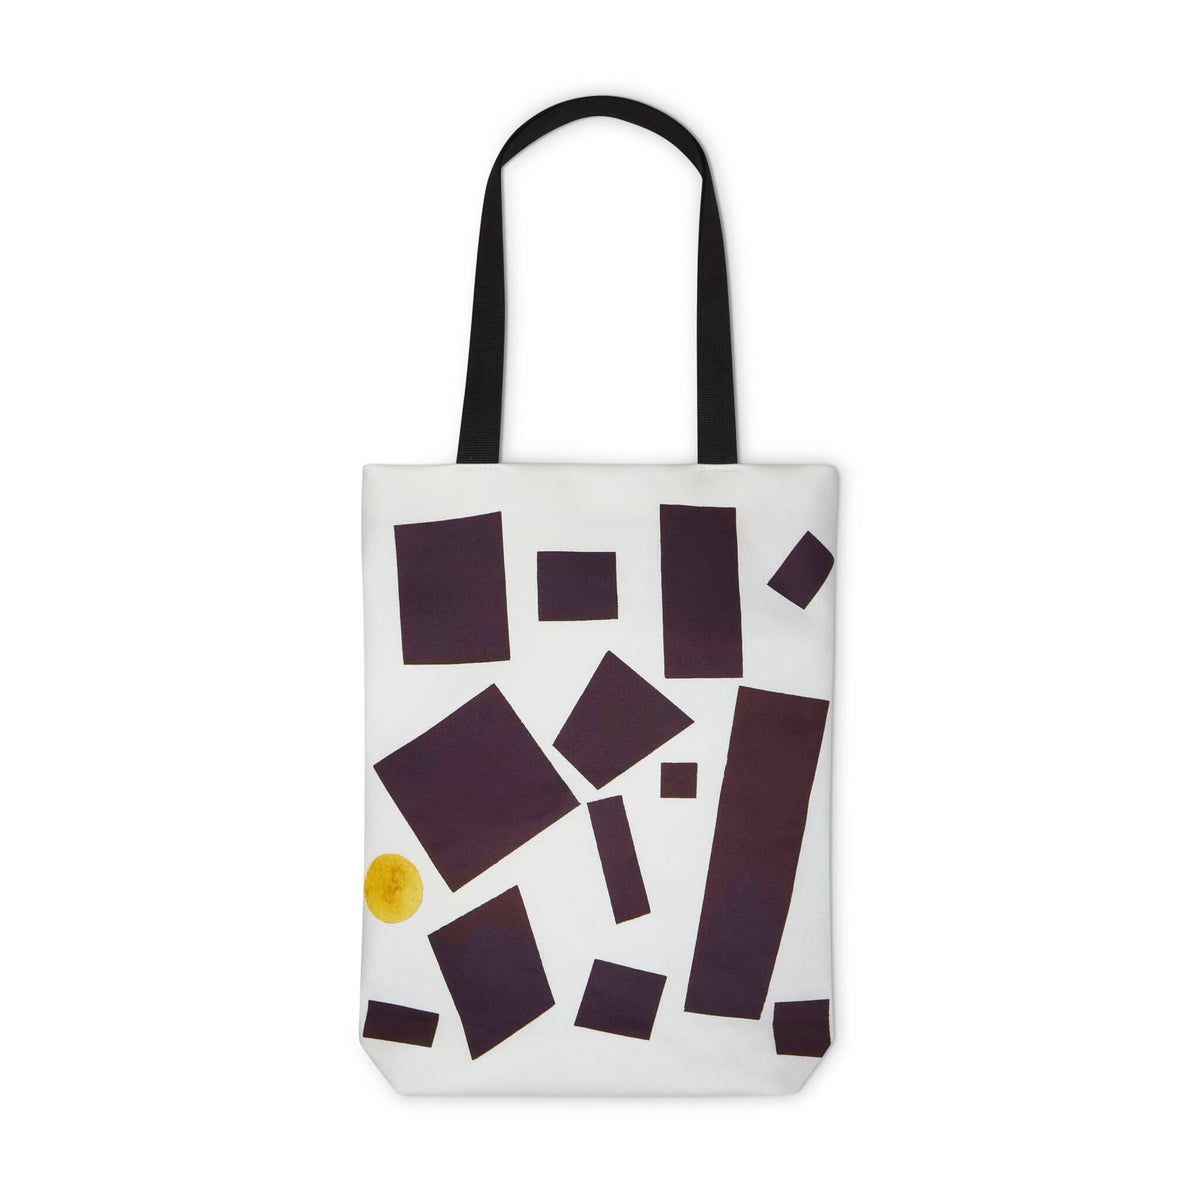 Man with black tote bag  People Images ~ Creative Market